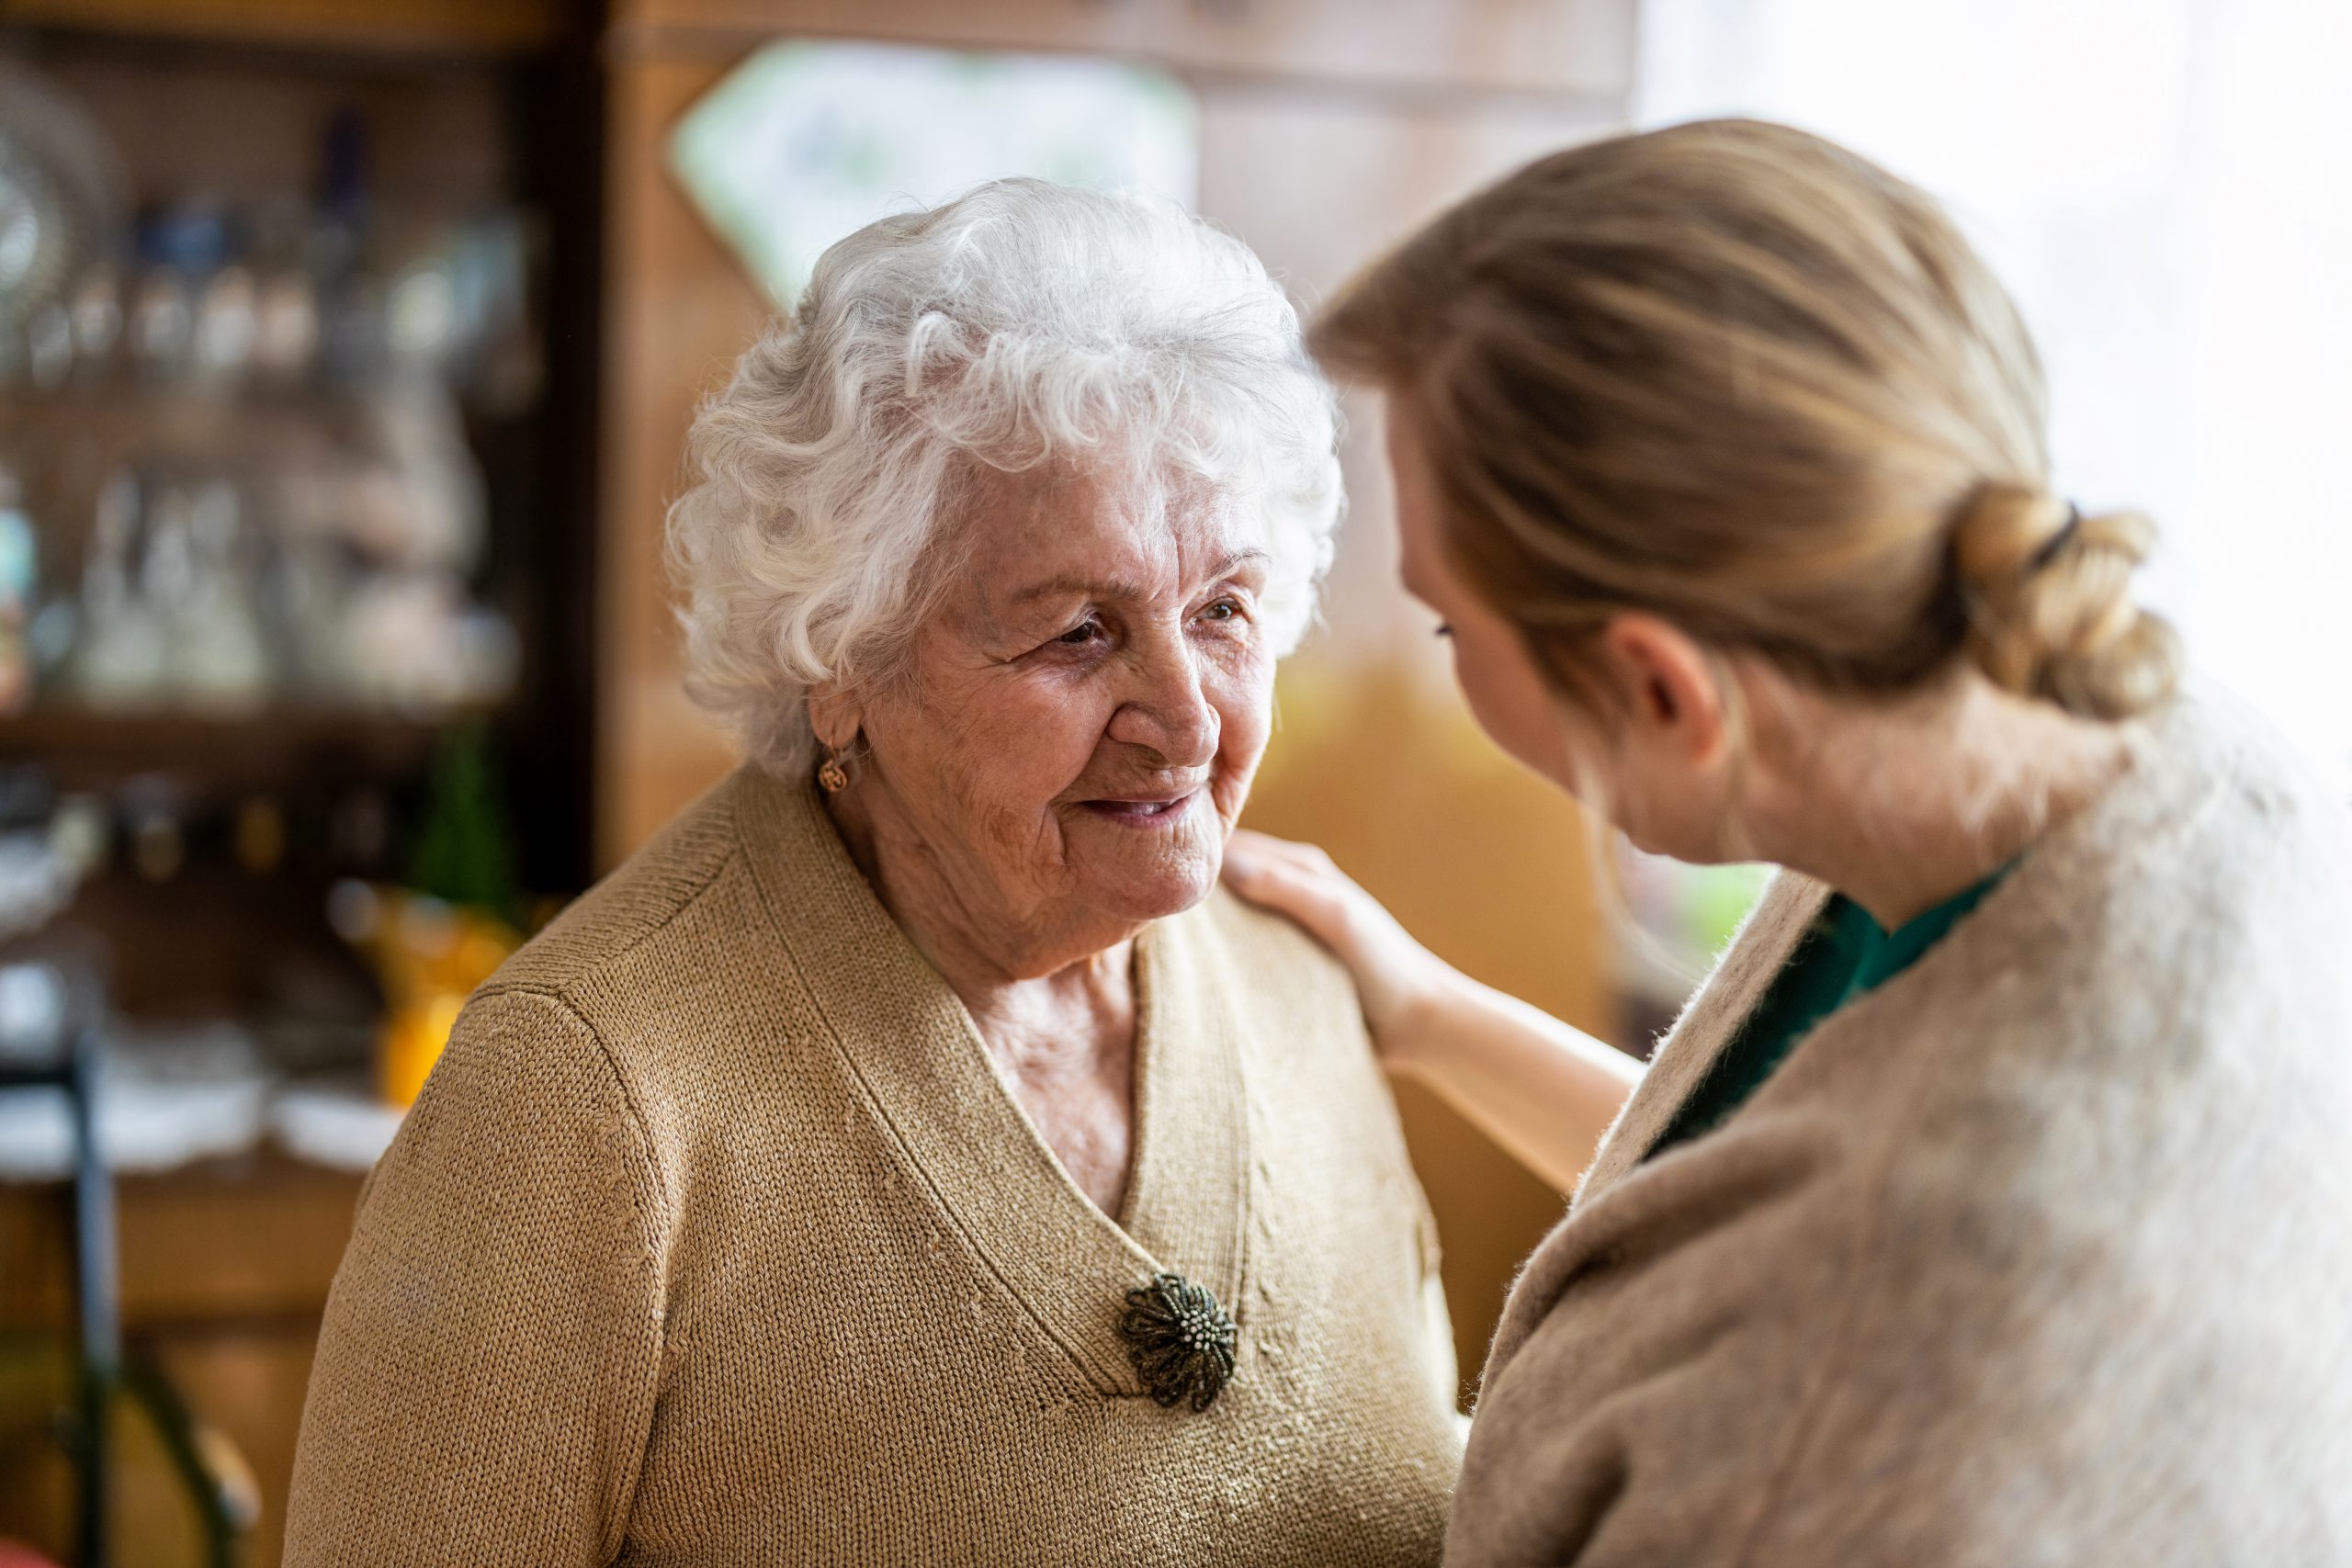 Support worker talking to a senior woman during home visit